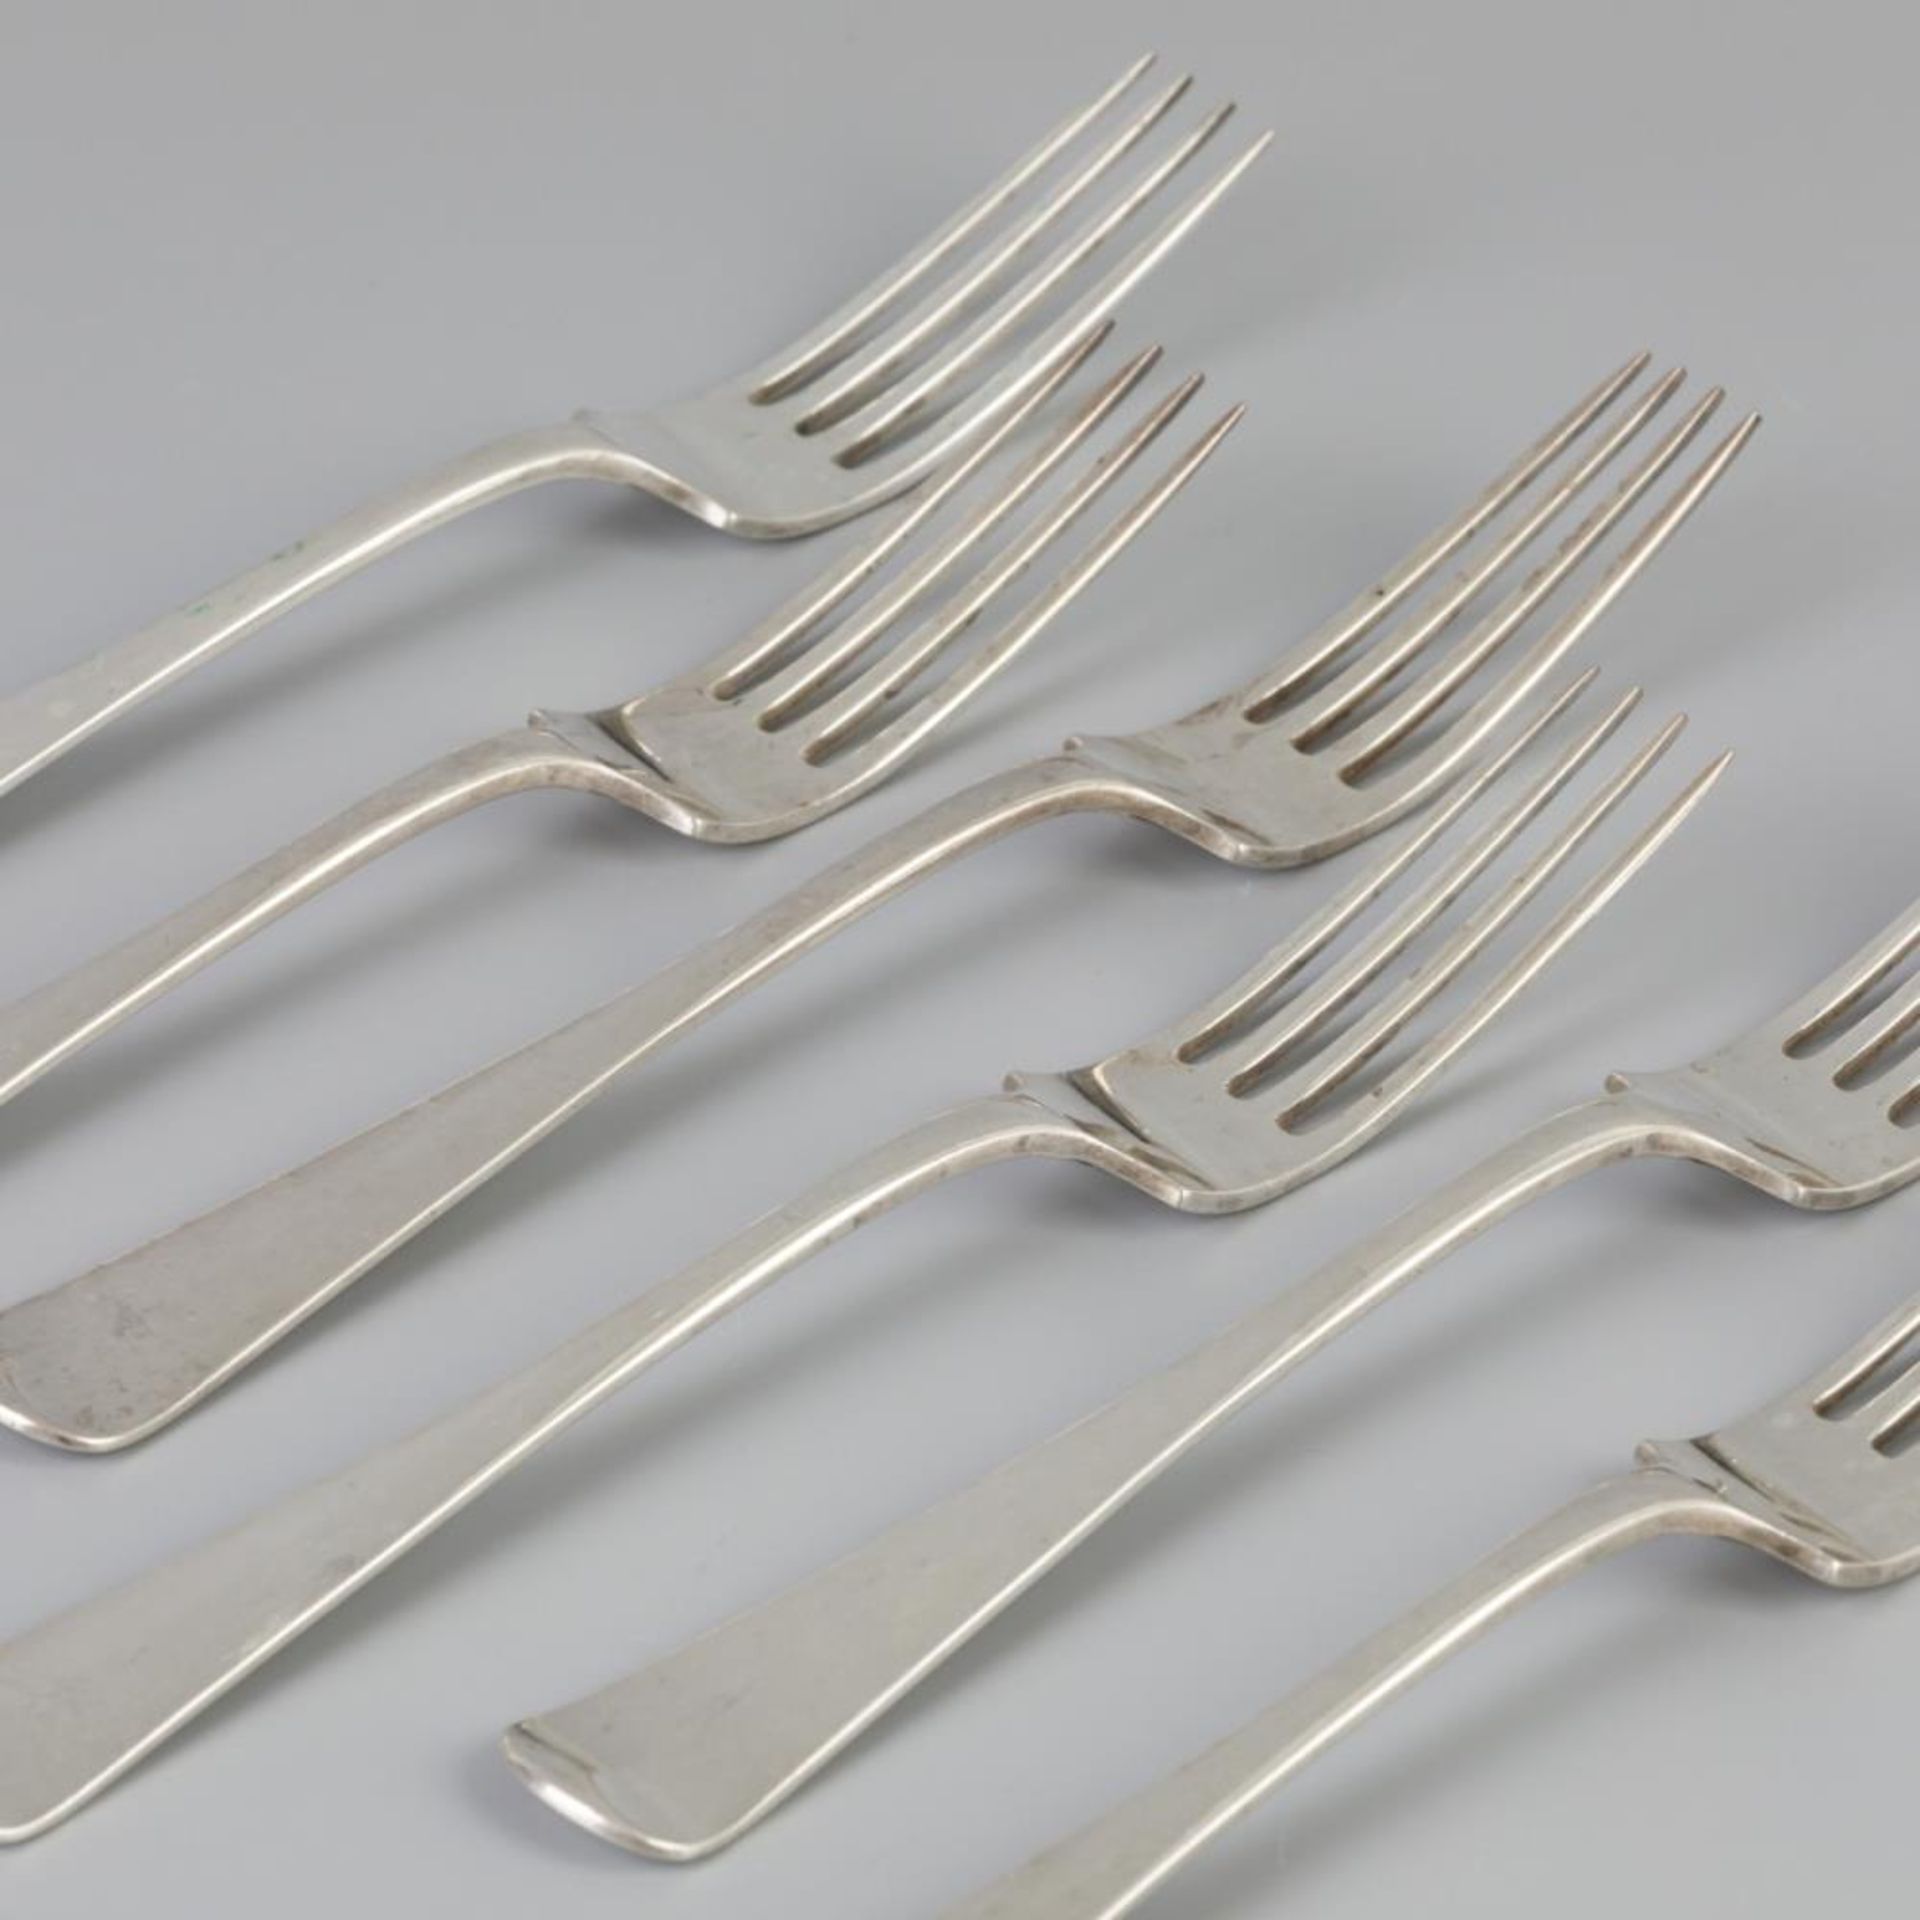 6 piece set dinner forks "Haags Lofje" silver. - Image 2 of 4